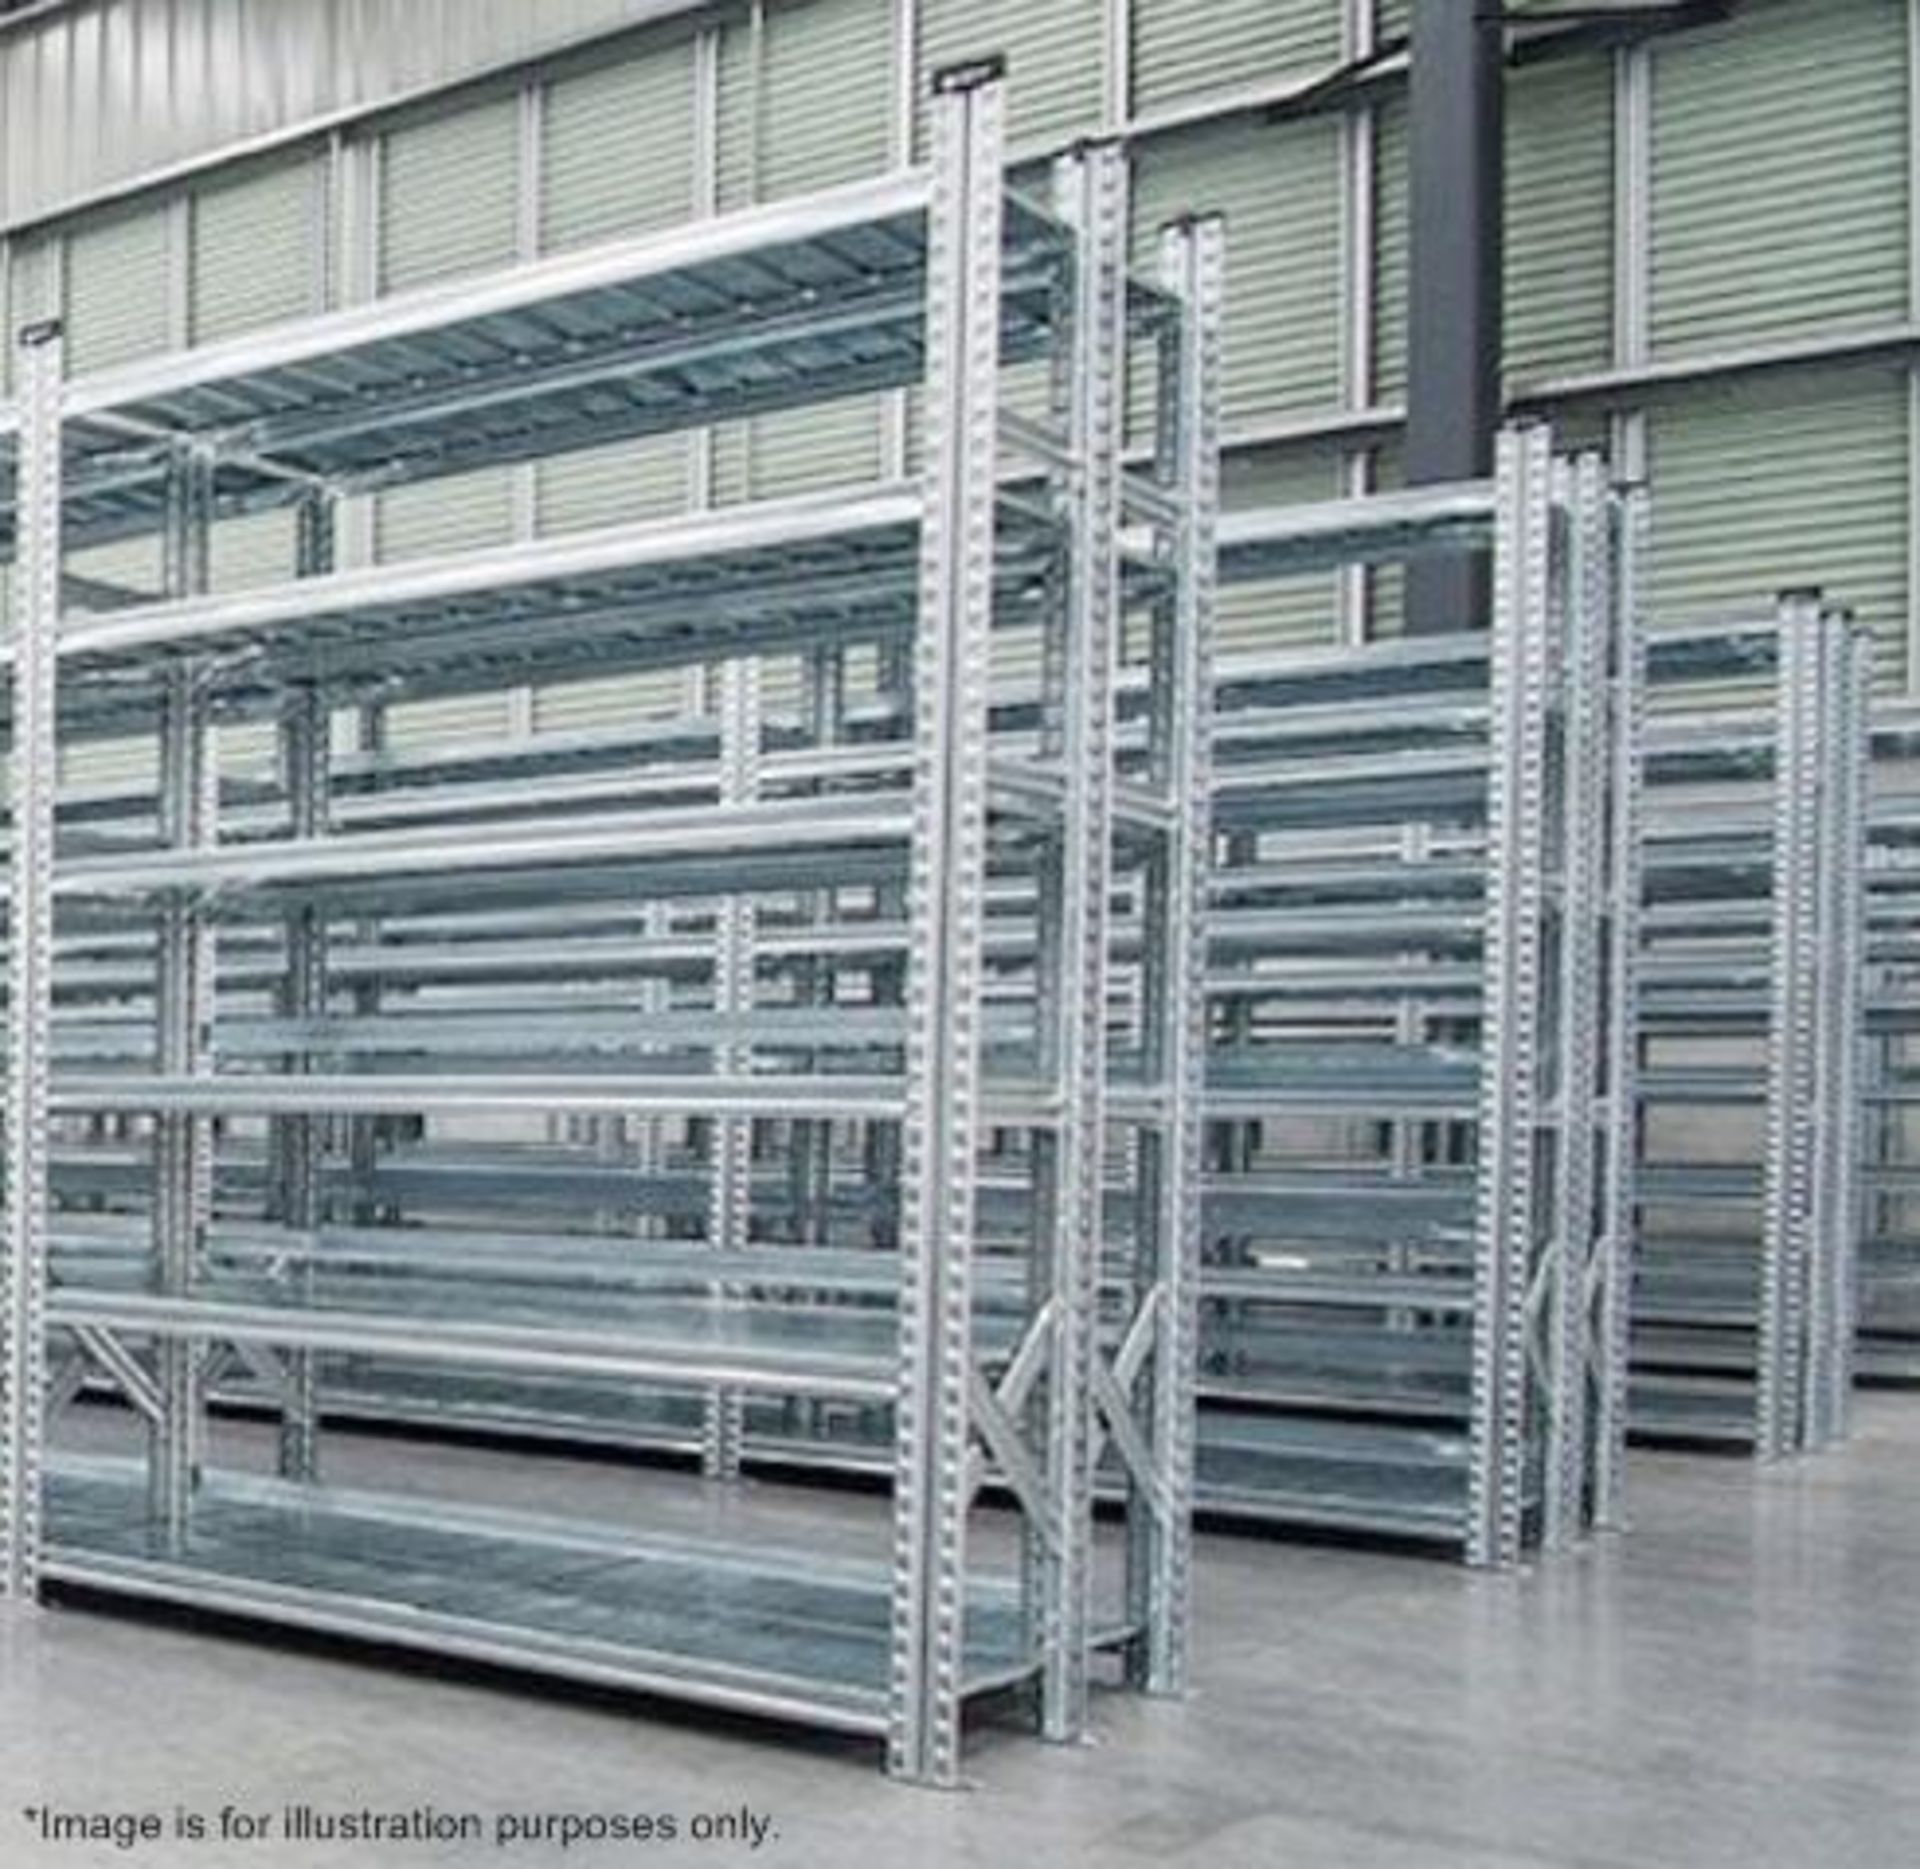 9 x Bays of Metalsistem Steel Modular Storage Shelving - Includes 29 Pieces - Recently Removed - Image 8 of 16